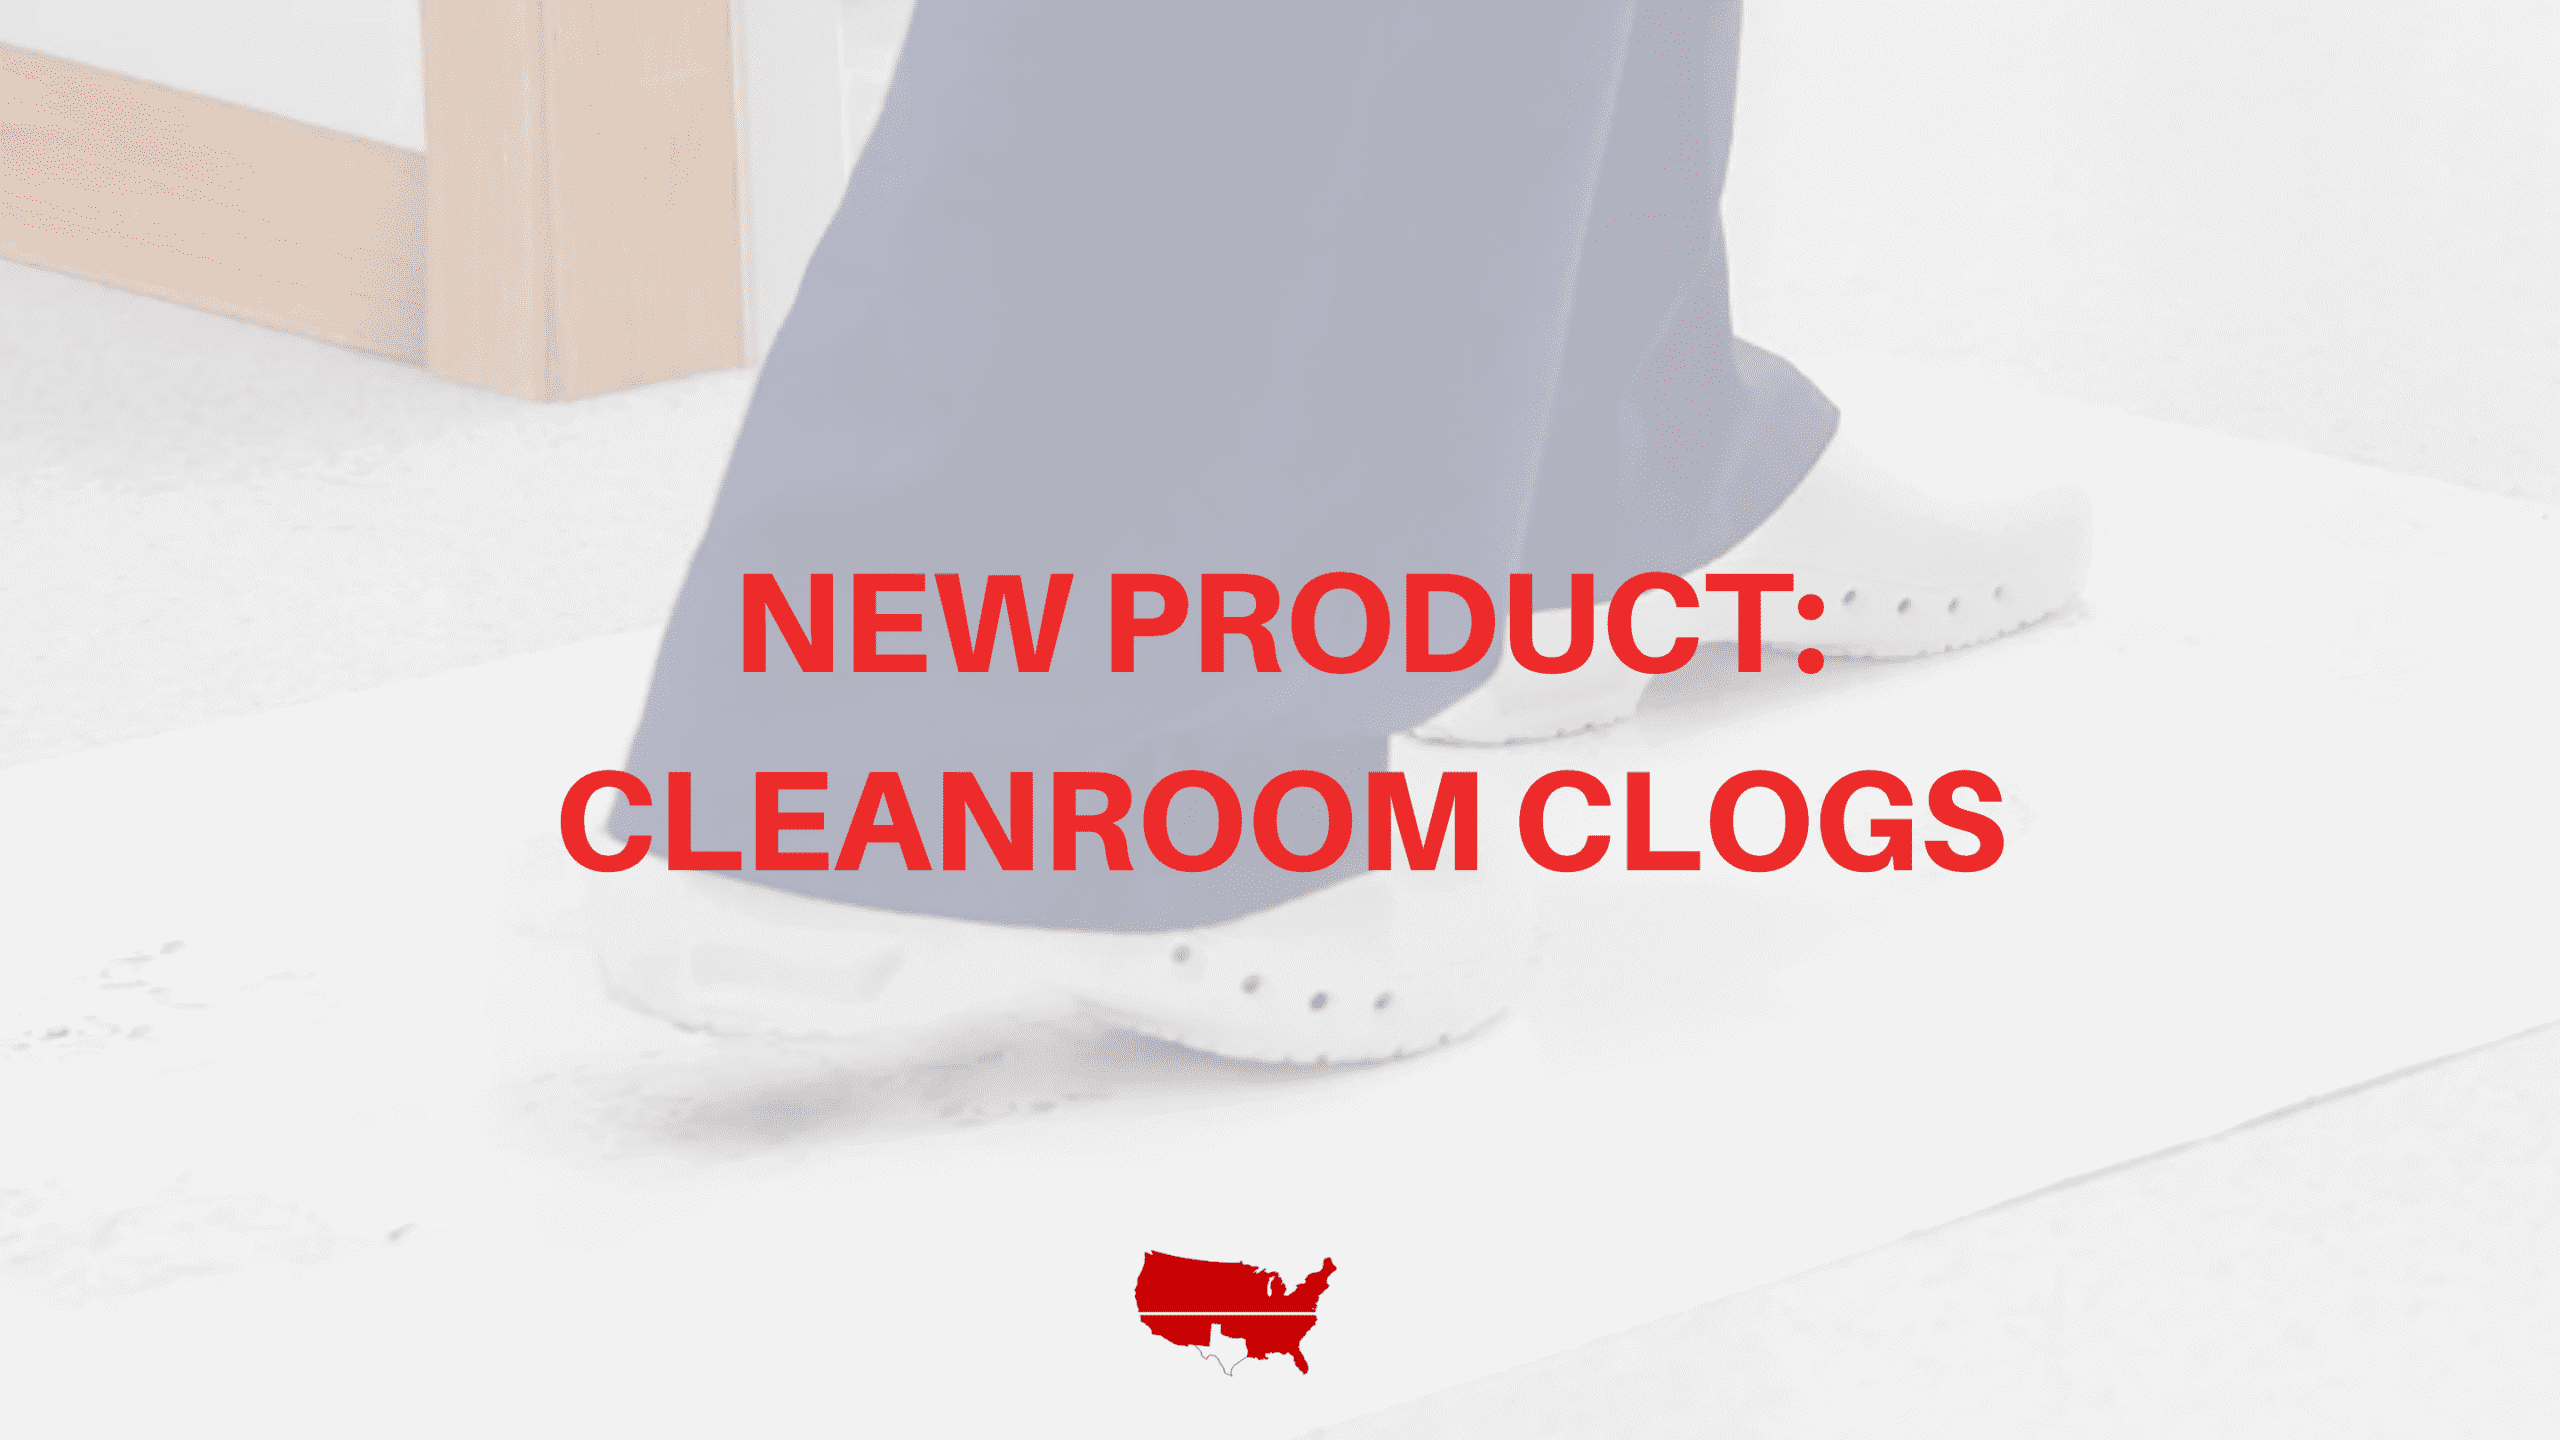 New Product: Cleanroom Clogs